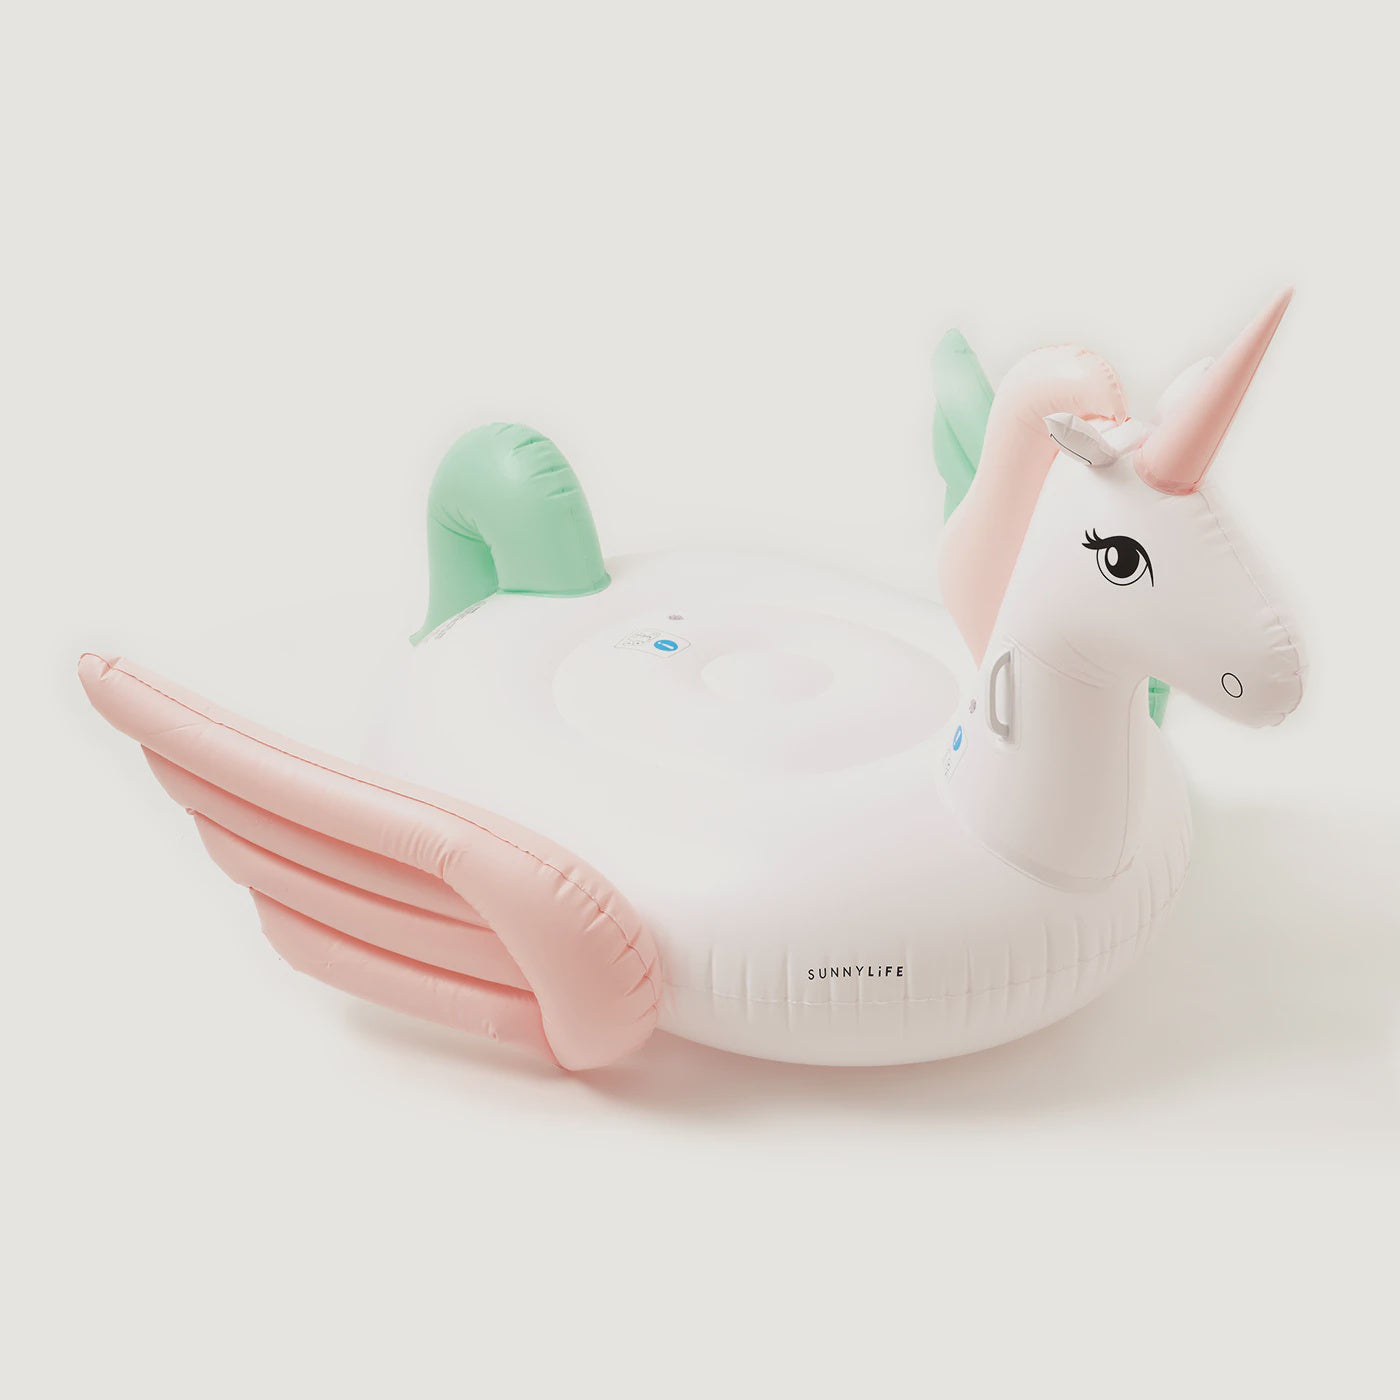 Sunnylife Luxe Ride-On Coral Ombre Unicorn Float